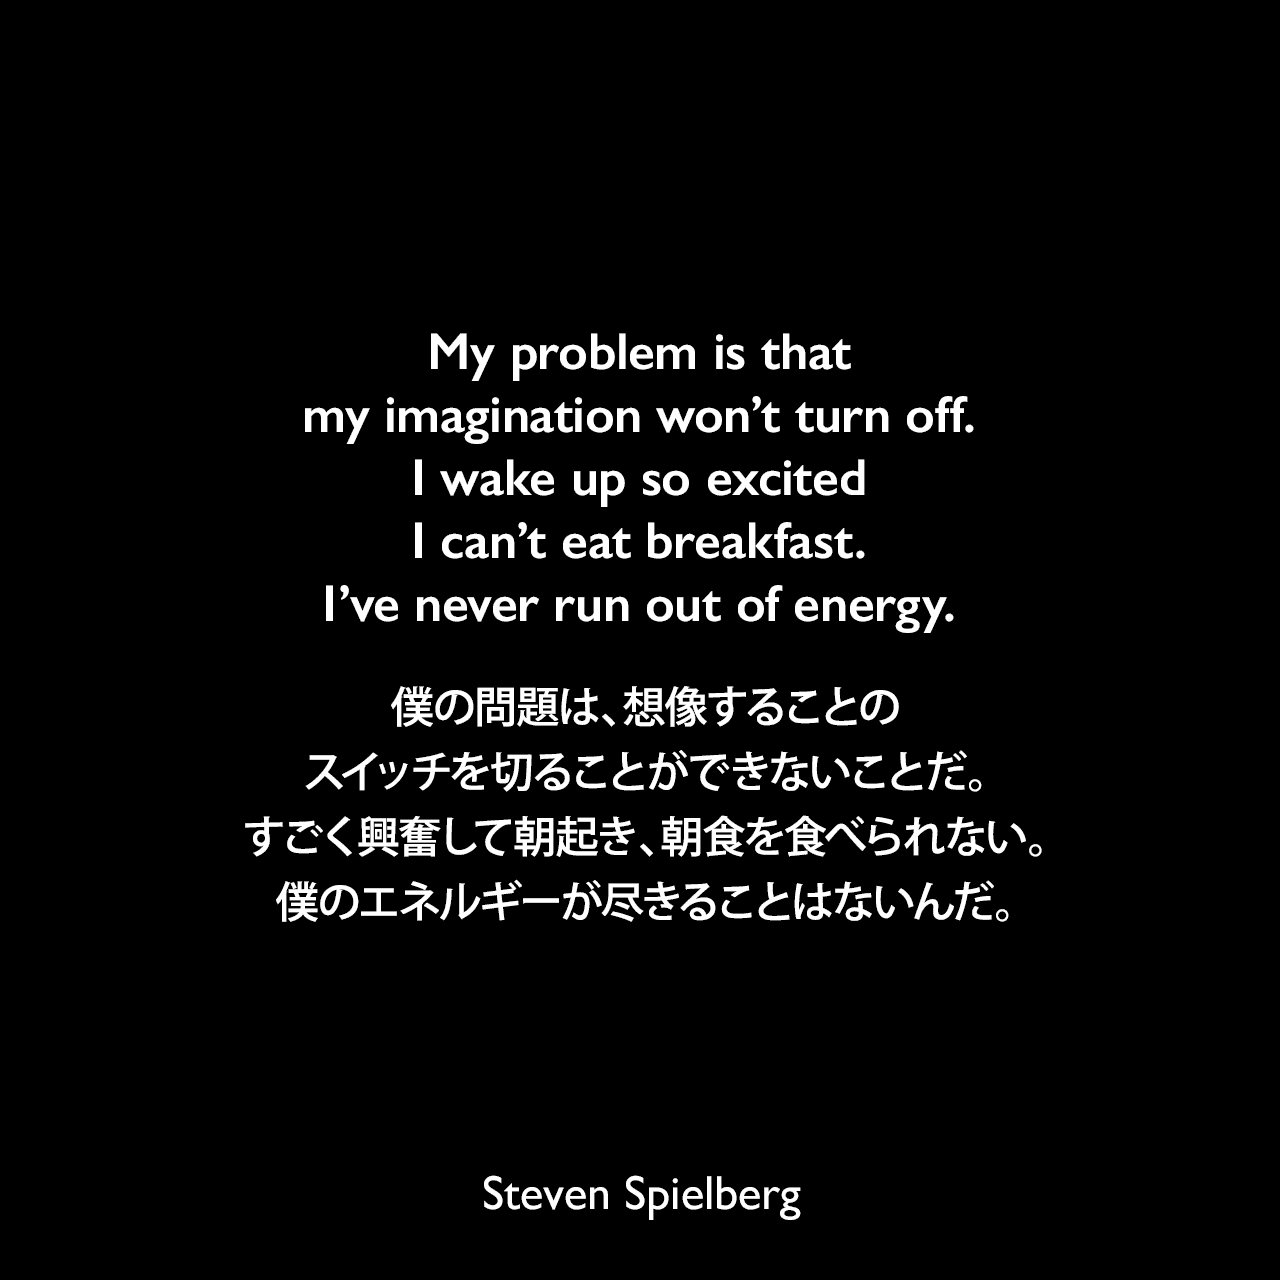 My problem is that my imagination won’t turn off. I wake up so excited I can’t eat breakfast. I’ve never run out of energy.僕の問題は、想像することのスイッチを切ることができないことだ。すごく興奮して朝起き、朝食を食べられない。僕のエネルギーが尽きることはないんだ。Steven Spielberg